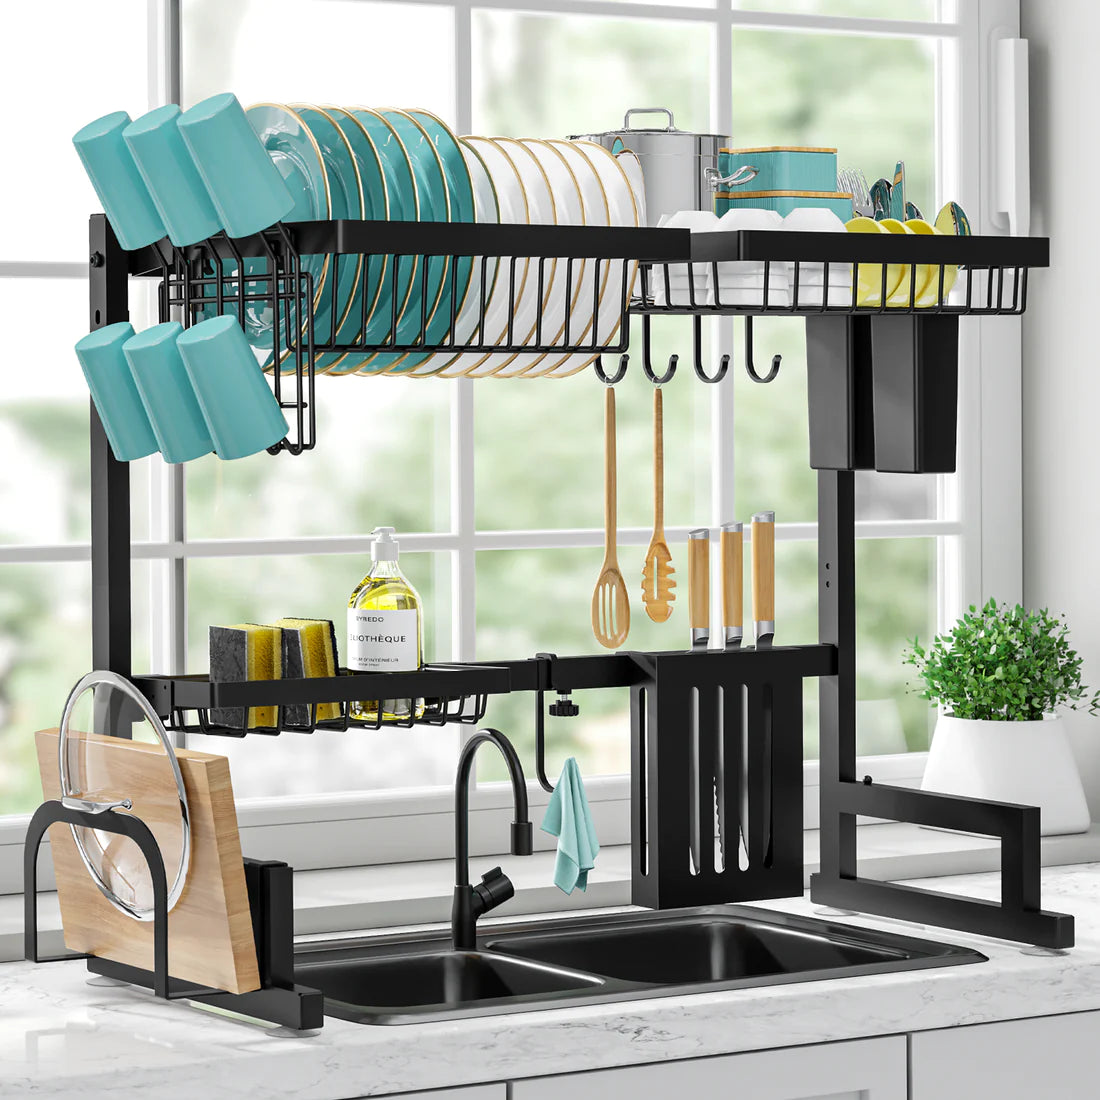 Dish Drying Rack - Expandable Dish Rack - Large Stainless Steel Dish Dryer  Racks for Kitchen Counter with Wine Glass Holder, Cutlery Holder, Black